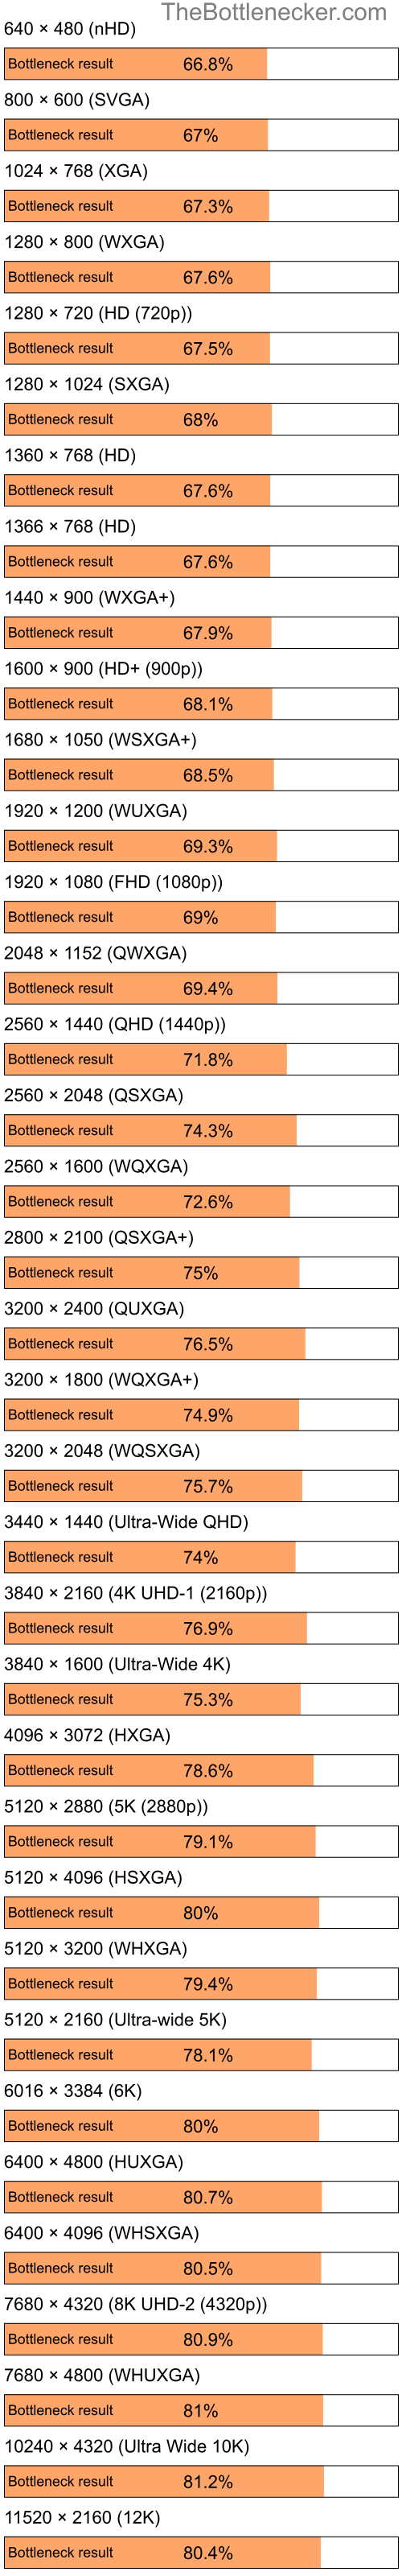 Bottleneck results by resolution for Intel Pentium 4 and AMD Mobility Radeon 4100 in General Tasks